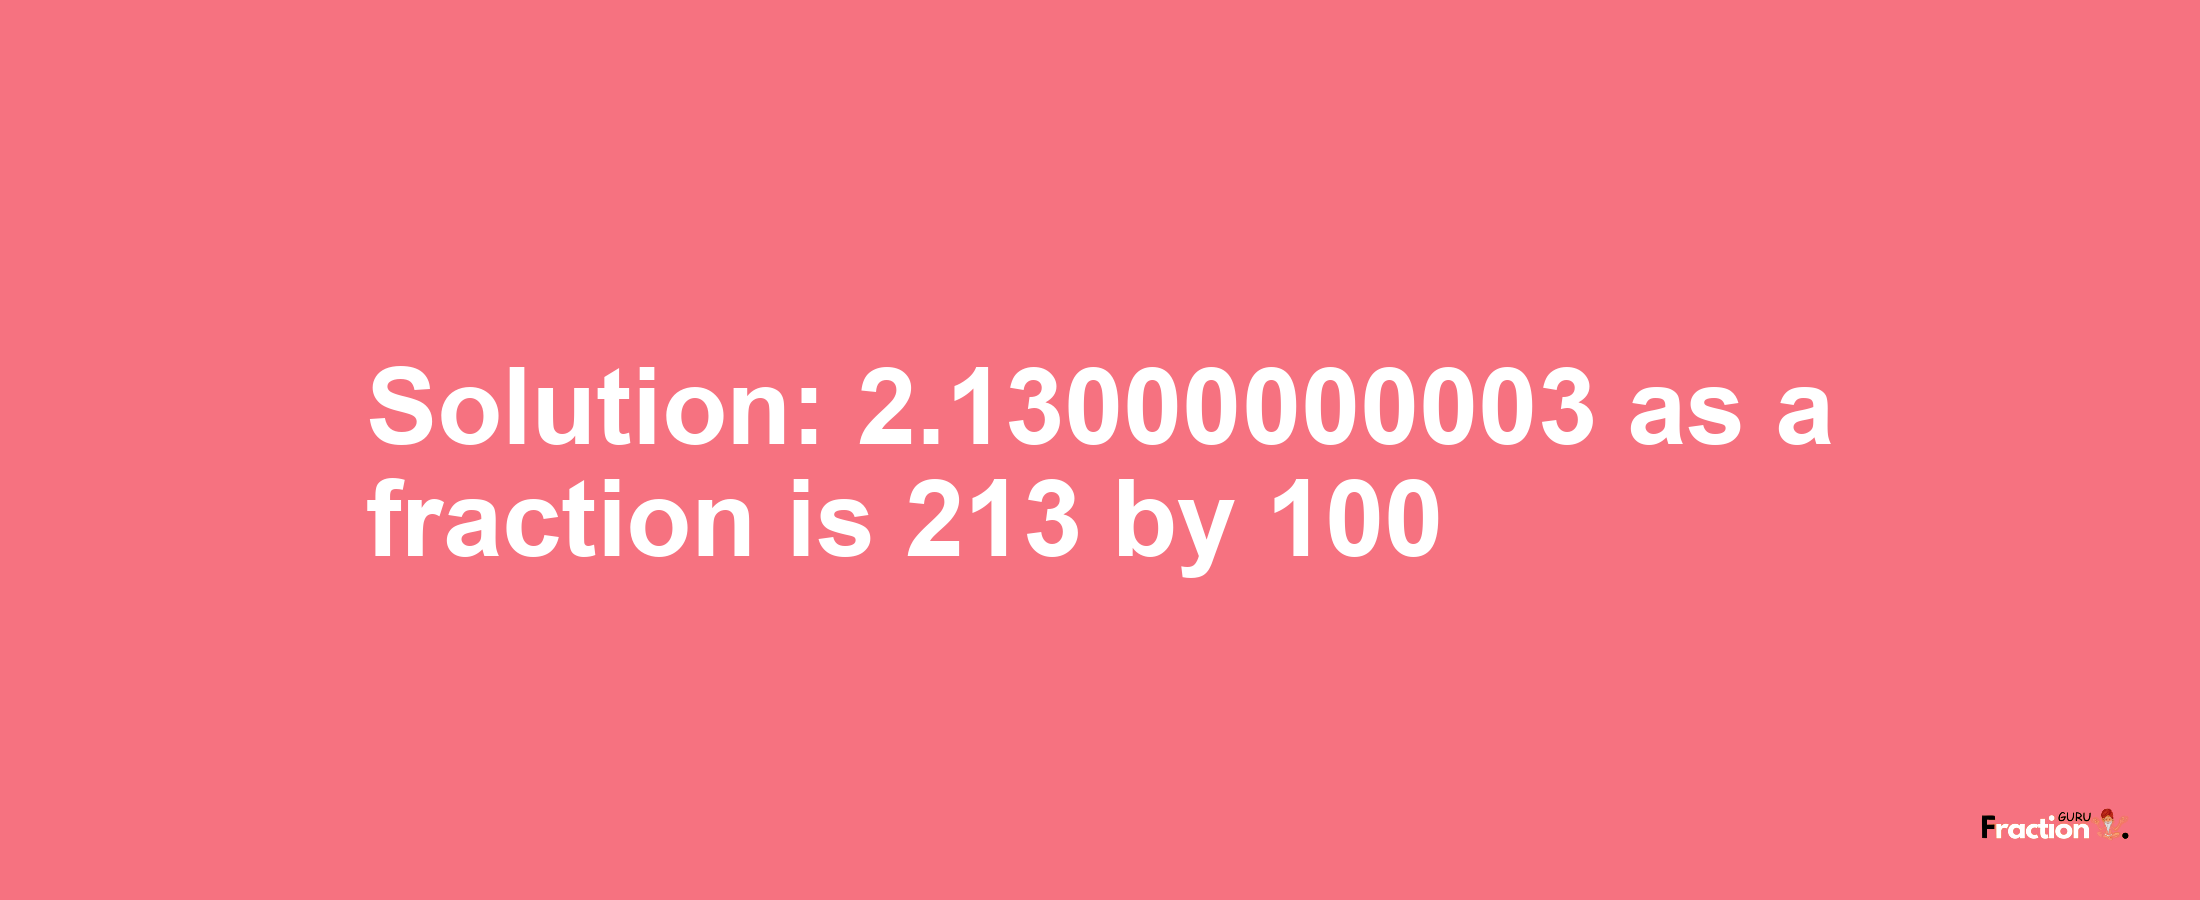 Solution:2.13000000003 as a fraction is 213/100